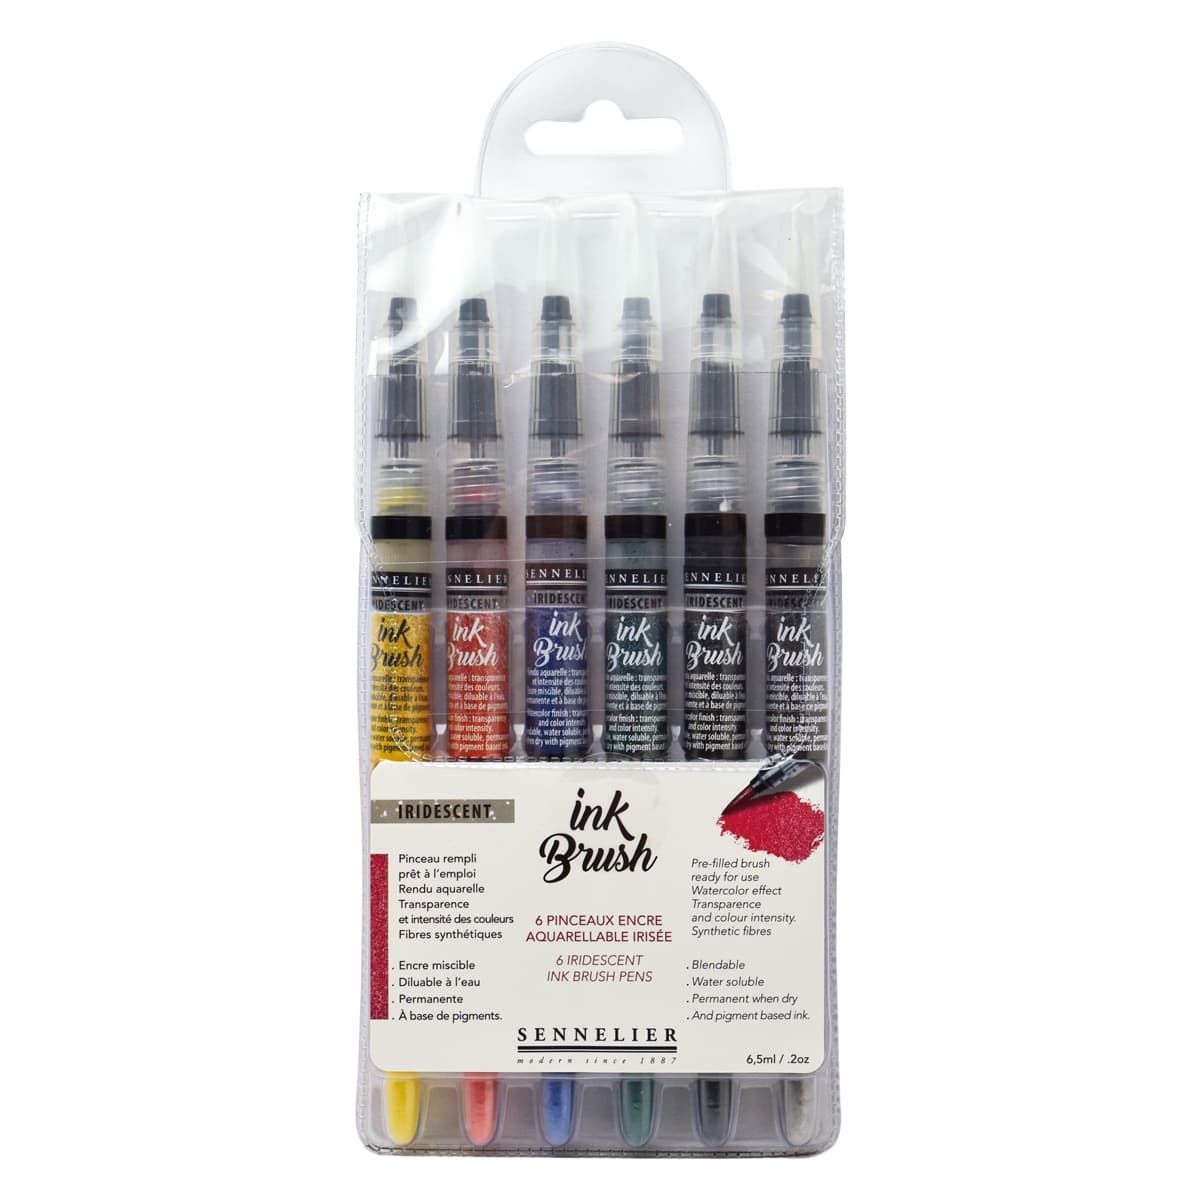 Watercolor Painting Water Soluble Colored Pencils Water Coloring Brush Pens Markers,Set of 6 Brush Tips, Size: Large, Assorted